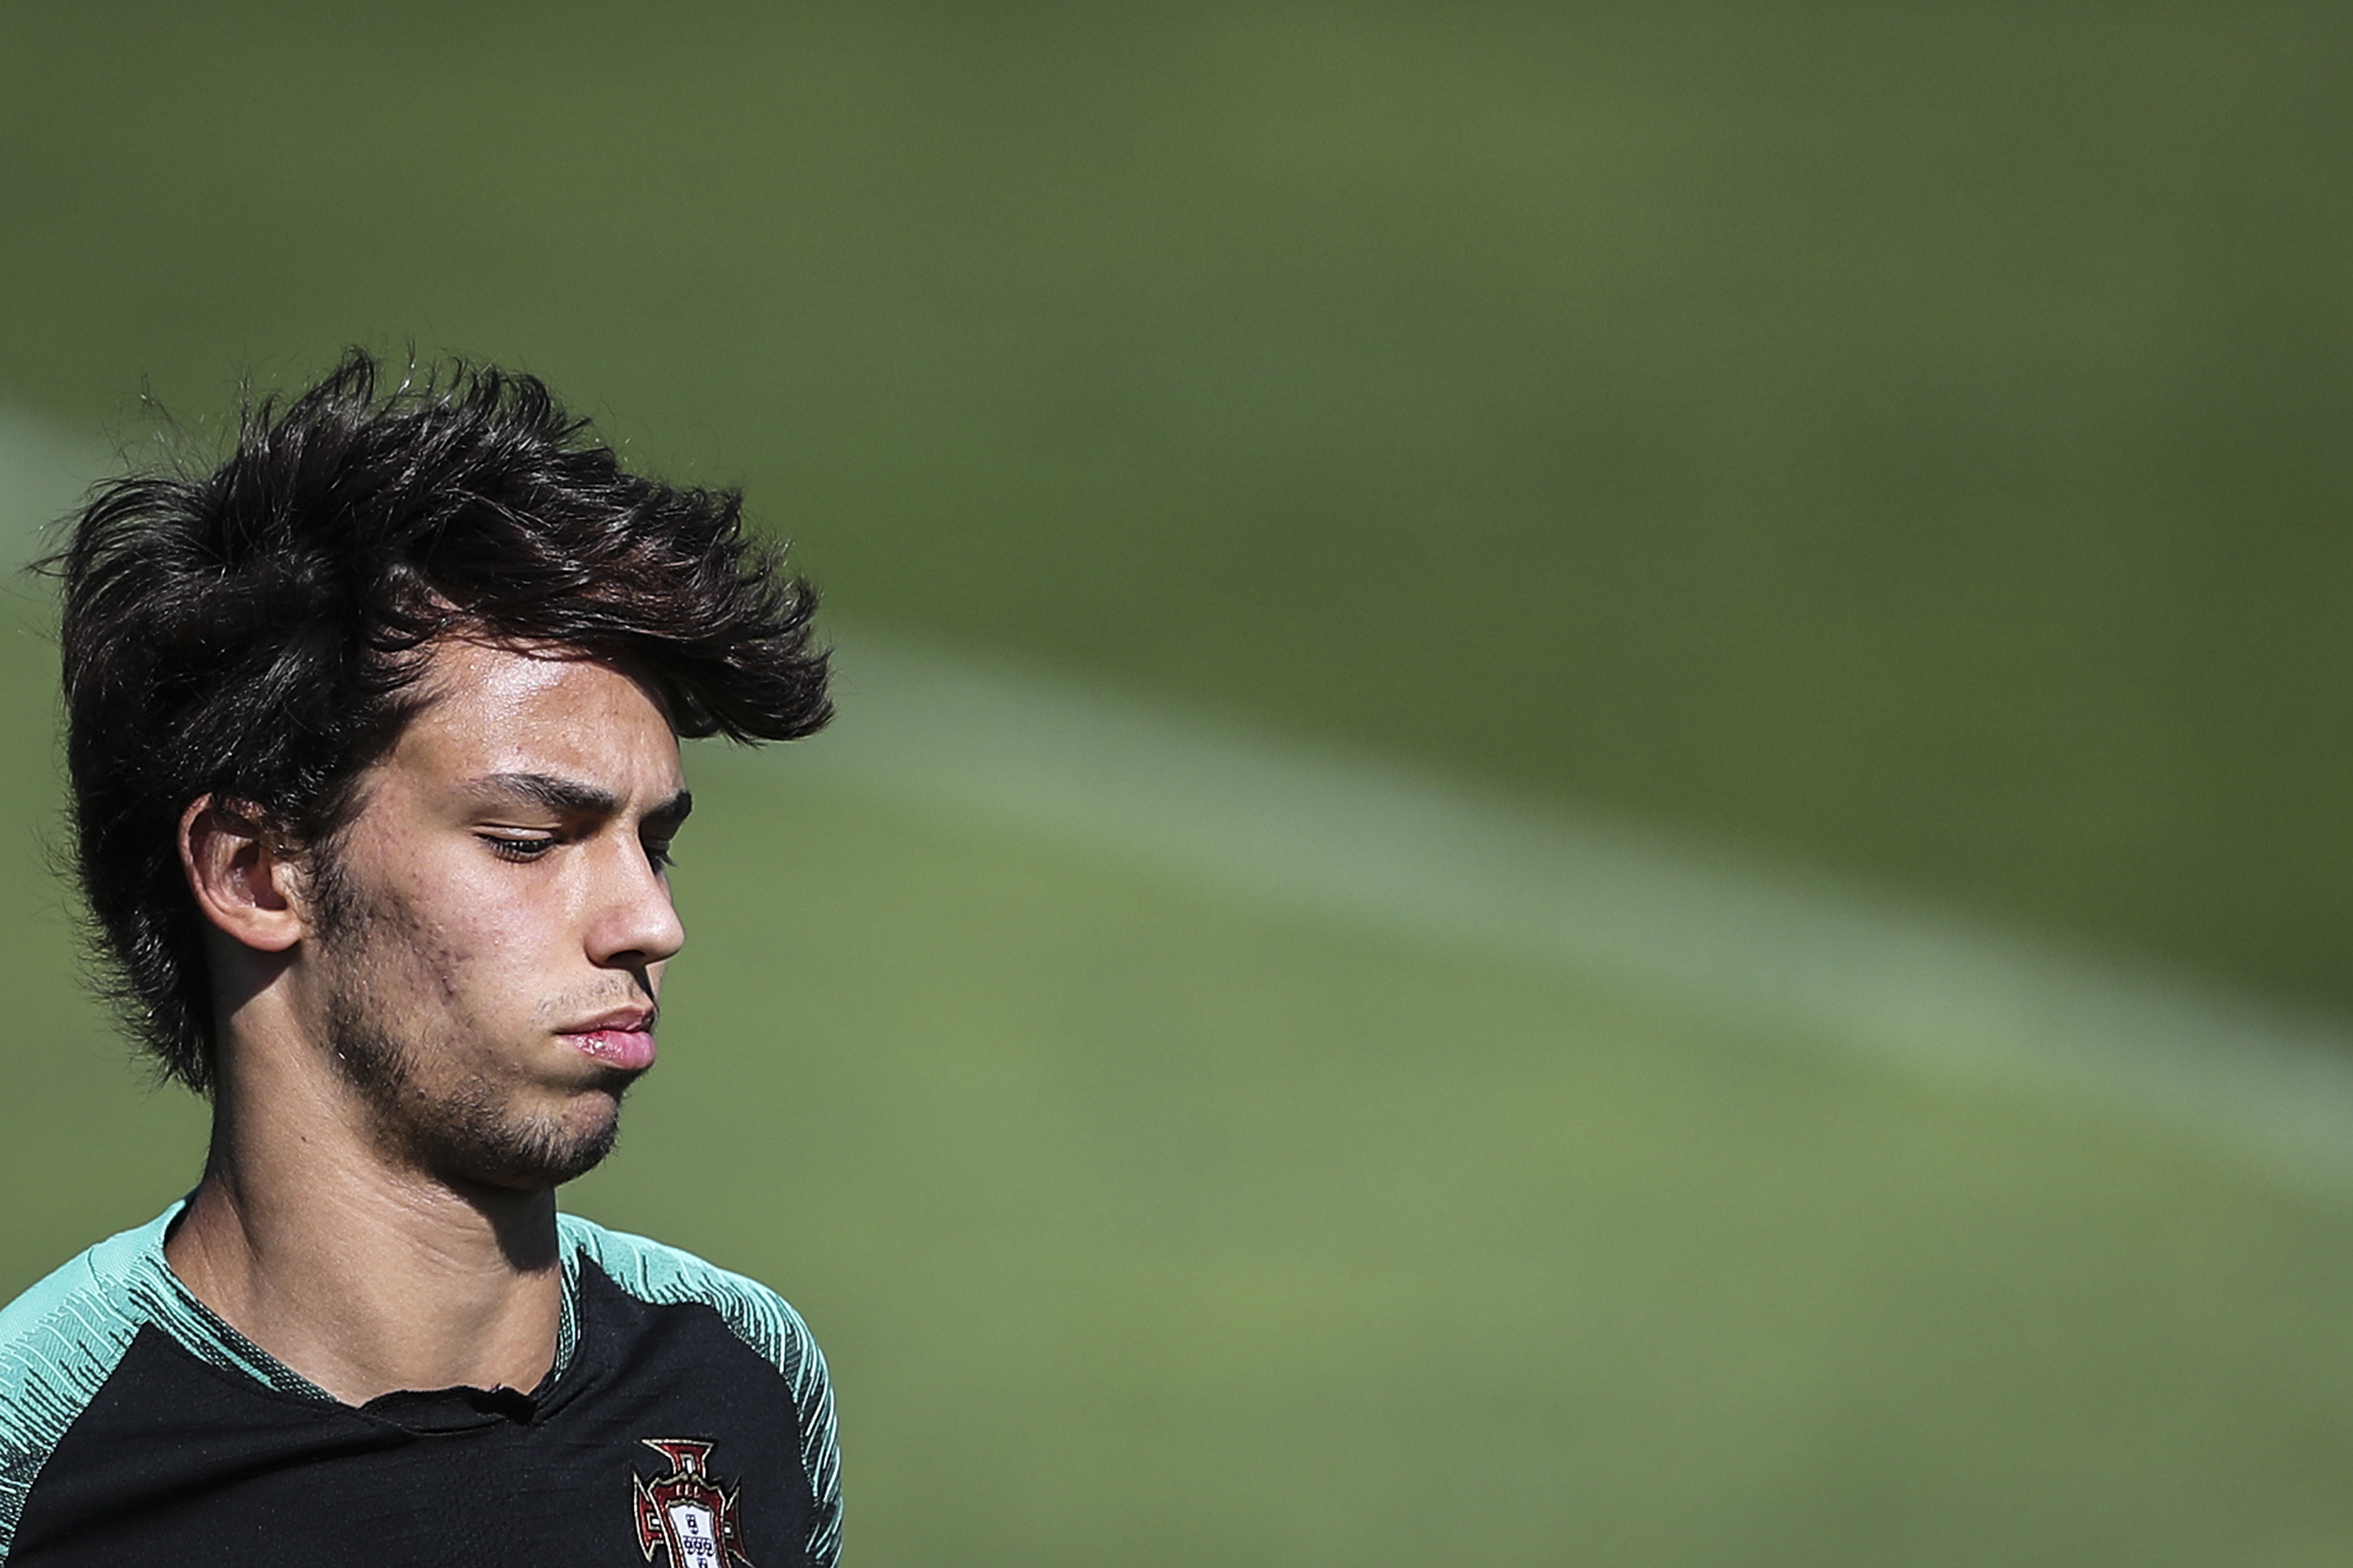 Portugal's midfielder Joao Felix attends a training session at Portugal's "Cidade do Futebol" training camp in Oeiras in the outskirts of Lisbon on May 29, 2019 as part of preparations for the final stage of the UEFA Nations League. (Photo by CARLOS COSTA / AFP)        (Photo credit should read CARLOS COSTA/AFP/Getty Images)